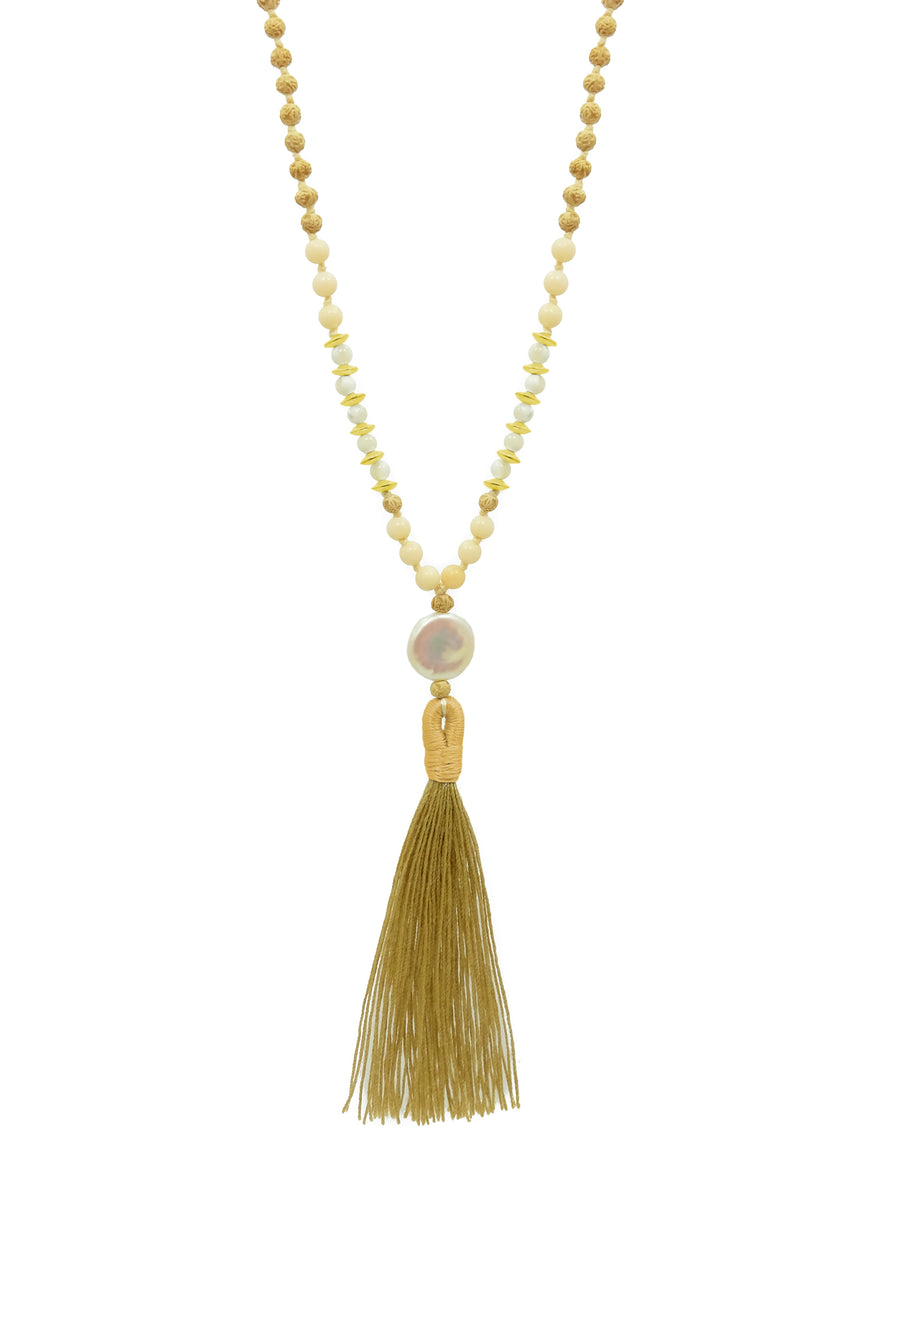  Uluwatu Moon Mala featuring rudrani beads, pearls, corals, moonstone, and elegant 22k Gold accents, by www.balimalas.com.